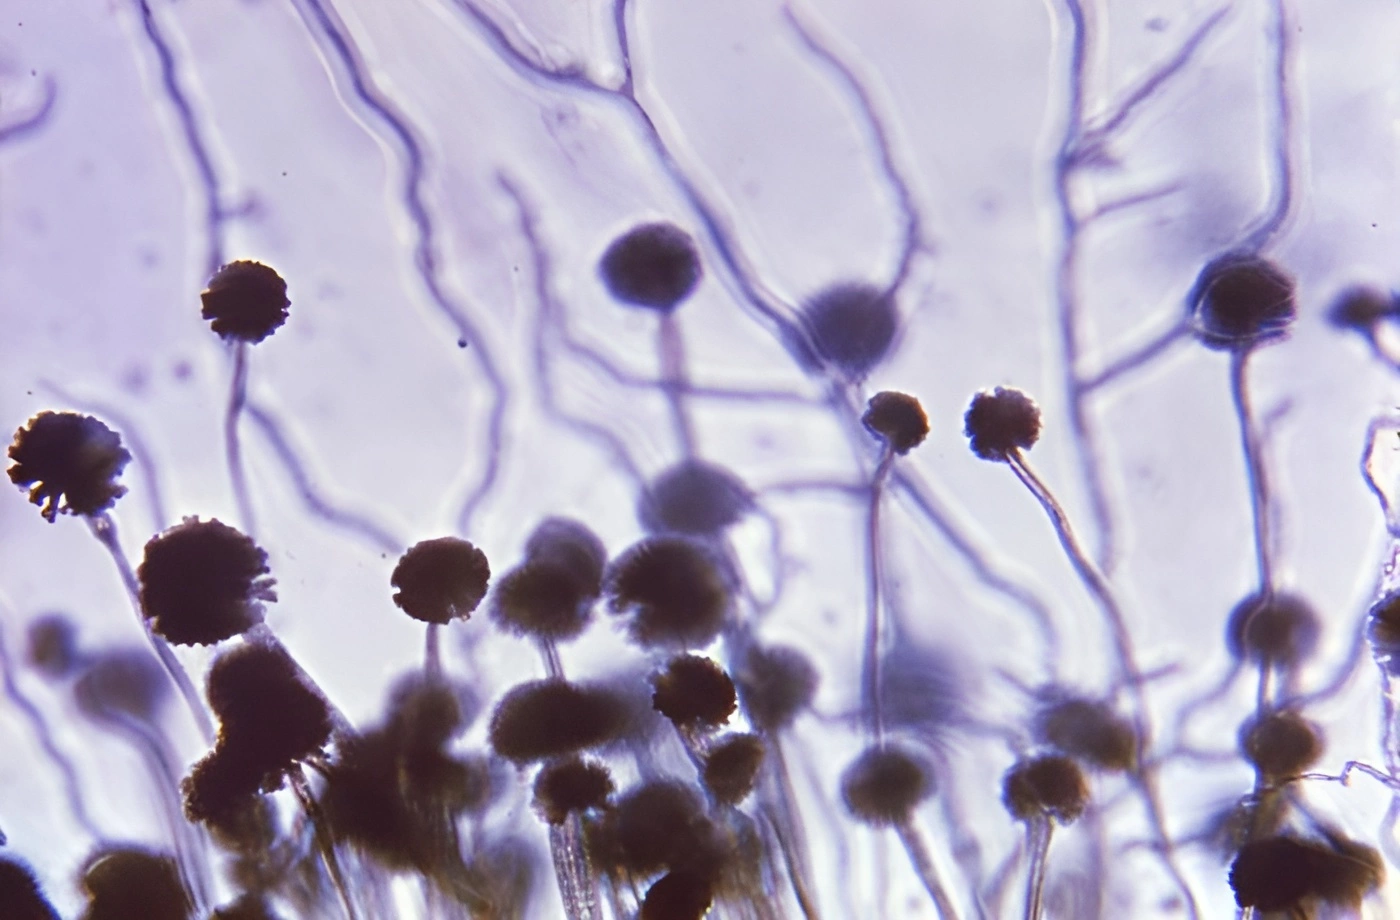 A photo taken from a microscope of black mold better known as aspergillus niger